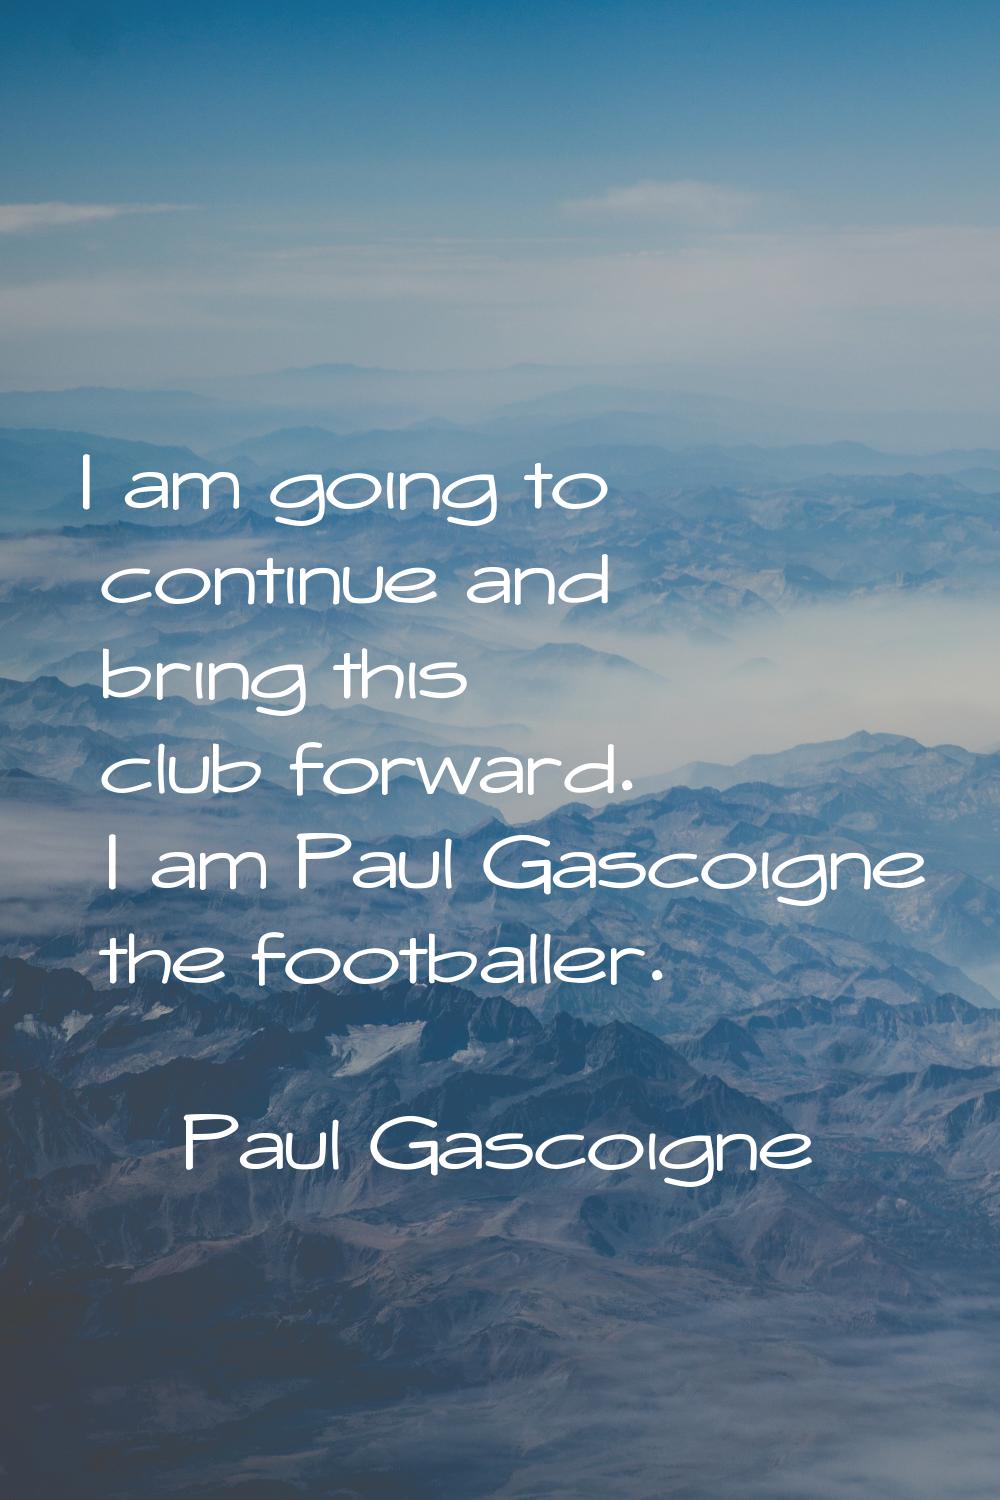 I am going to continue and bring this club forward. I am Paul Gascoigne the footballer.